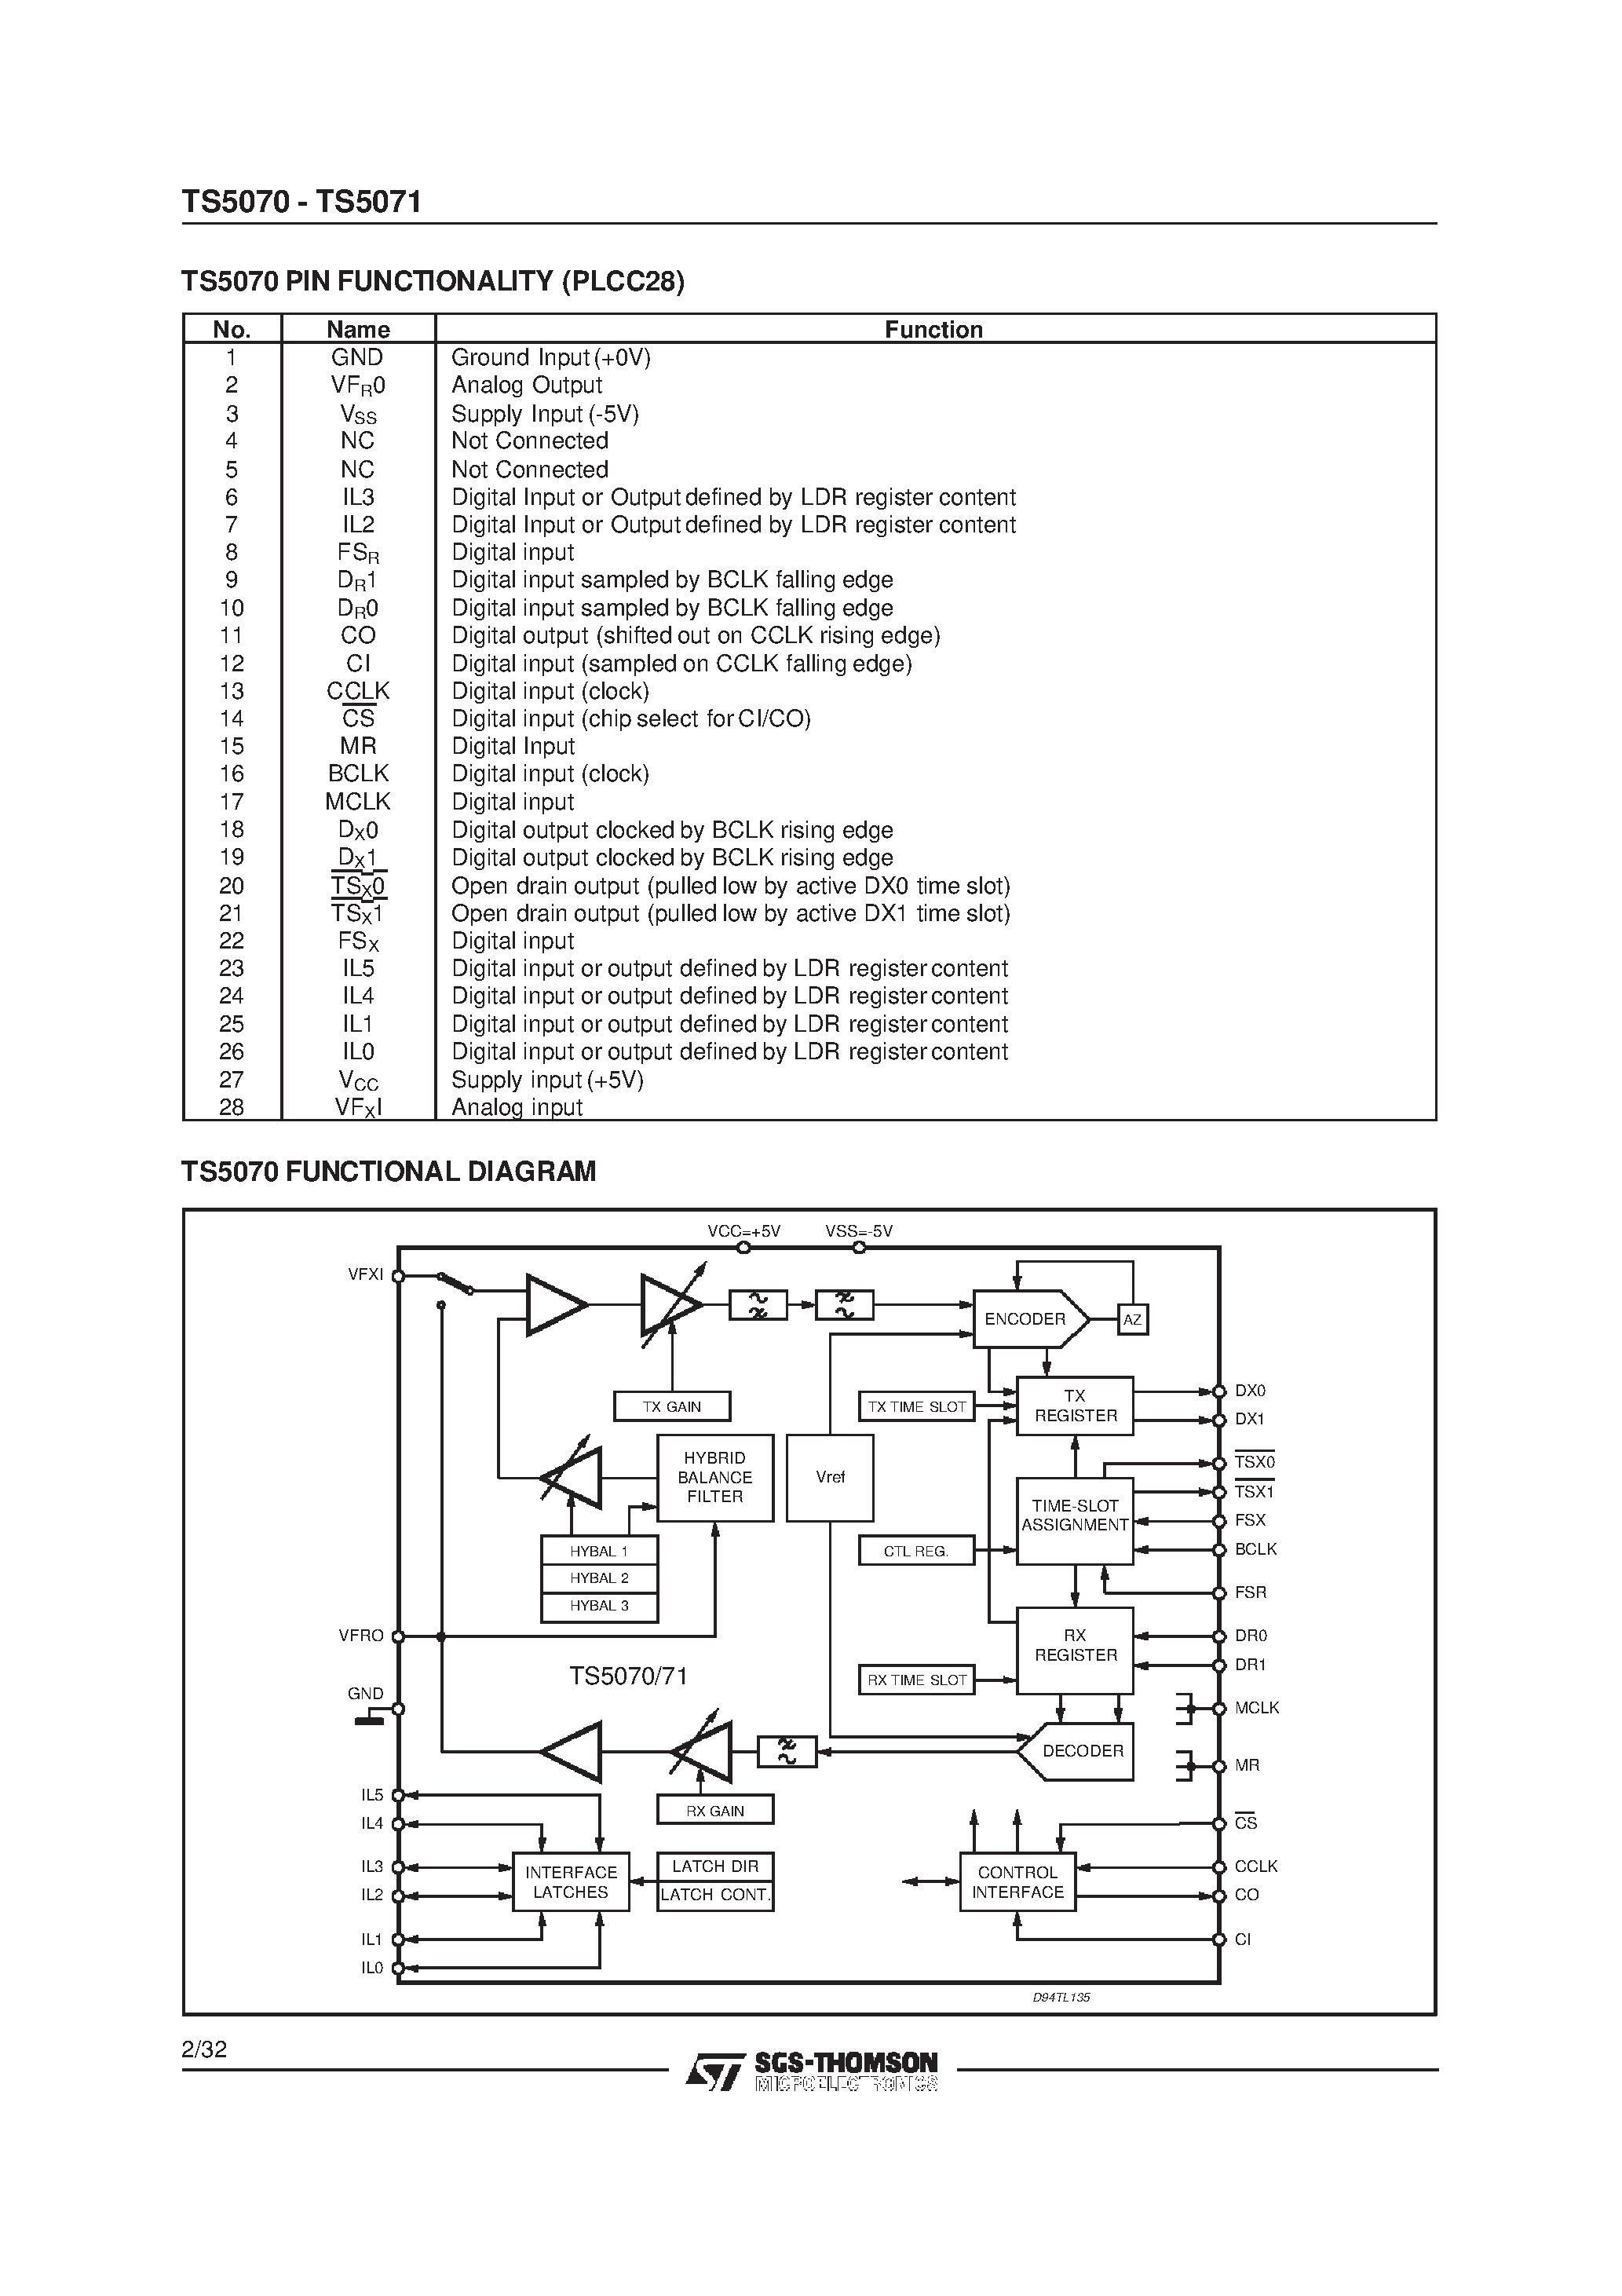 Datasheet TS5071N - PROGRAMMABLE CODEC/FILTER COMBO 2ND GENERATION page 2